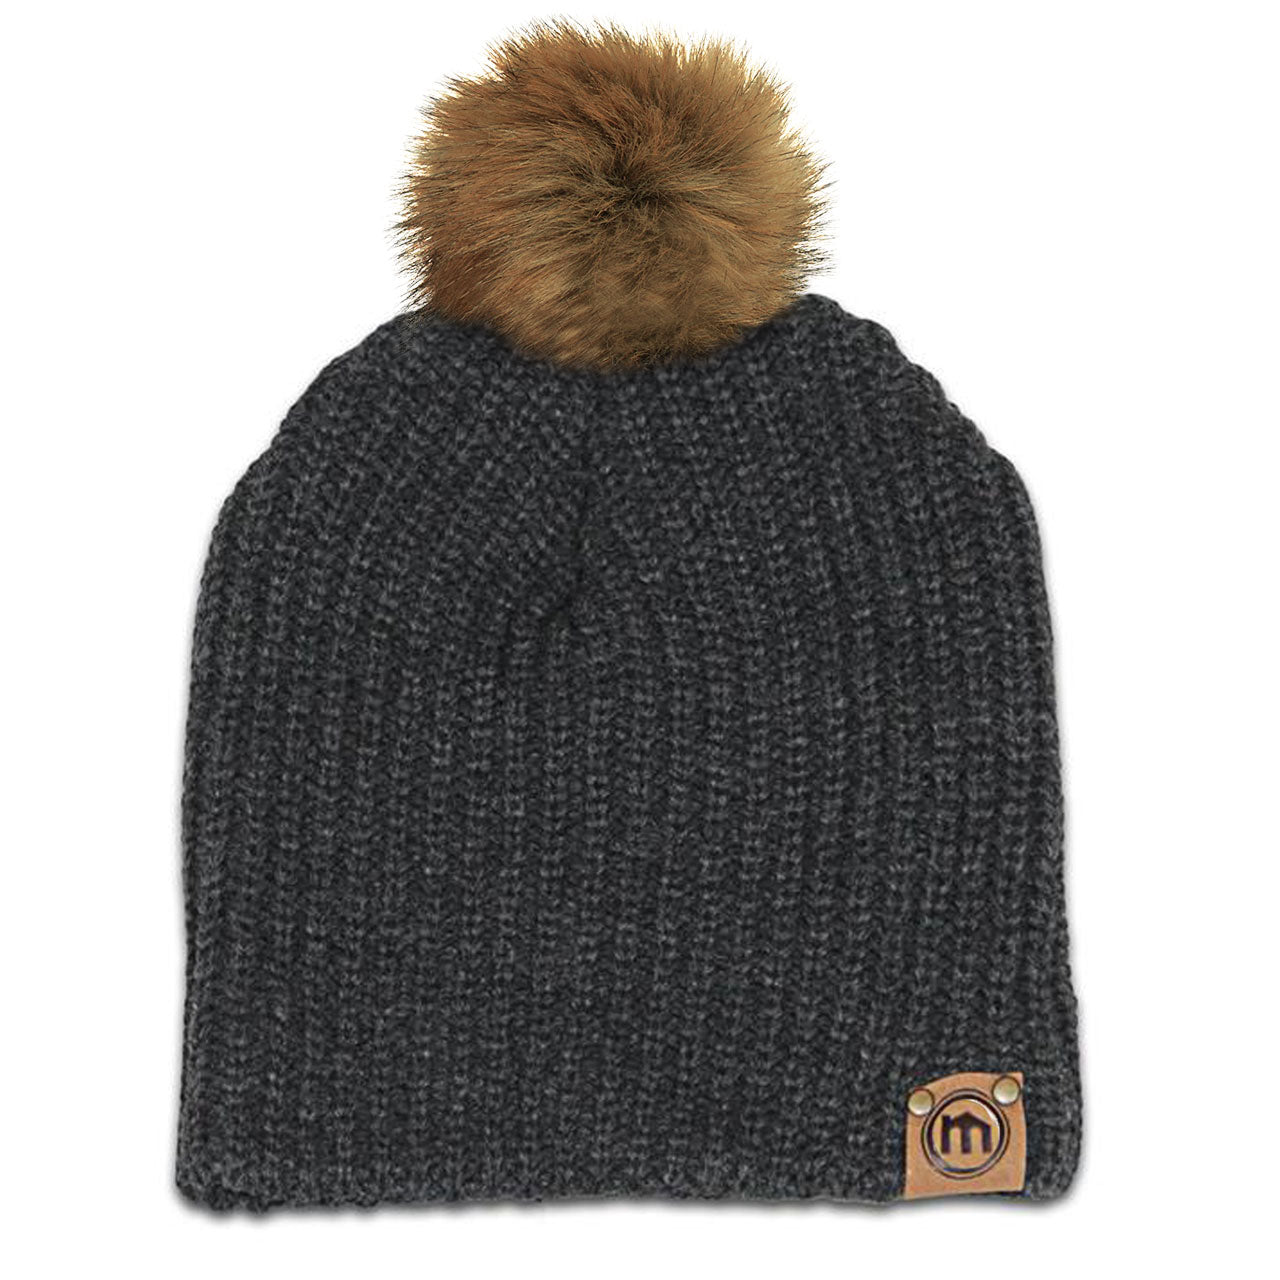 Womens Beanies - Mitscoots Outfitters